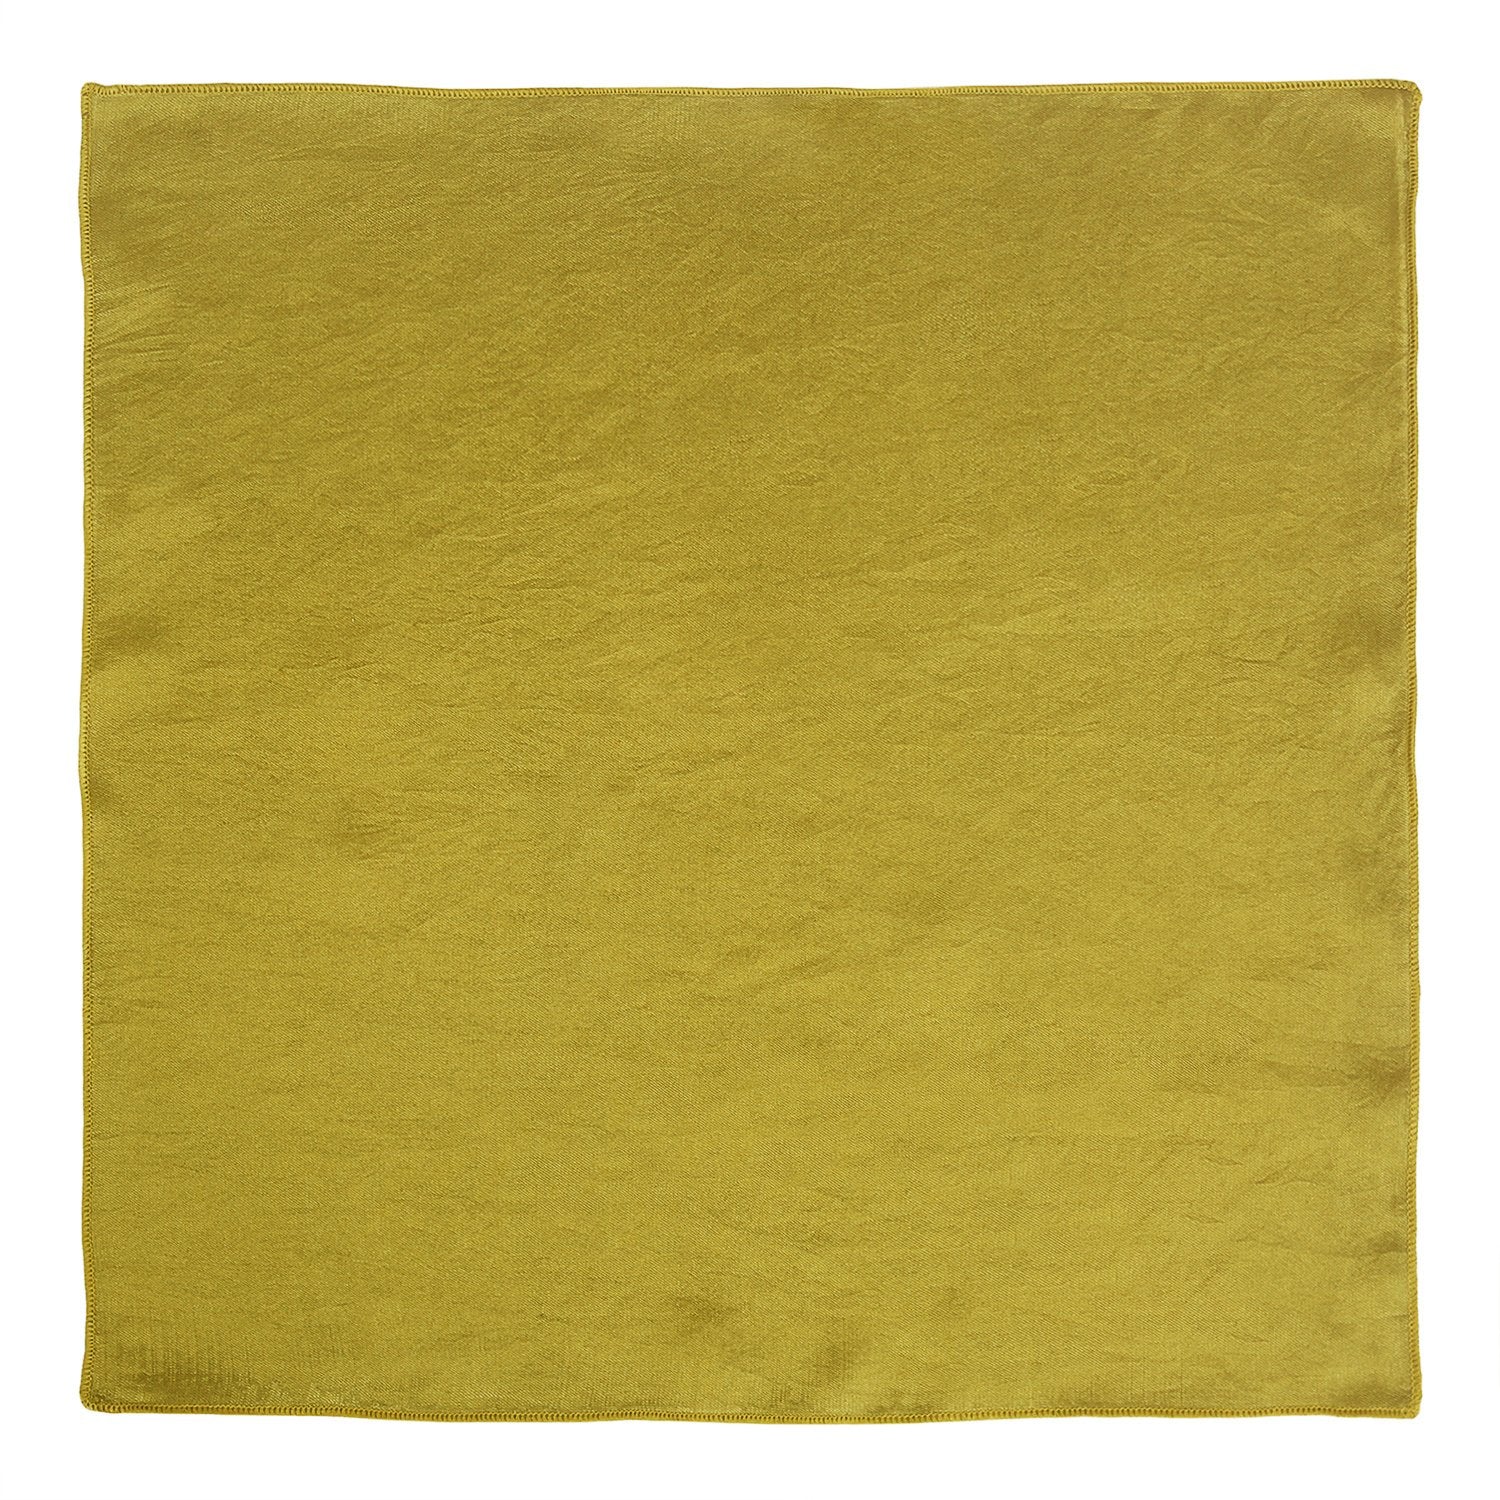 Chokore Mehandi Green Pure Silk Pocket Square, from the Solids Line